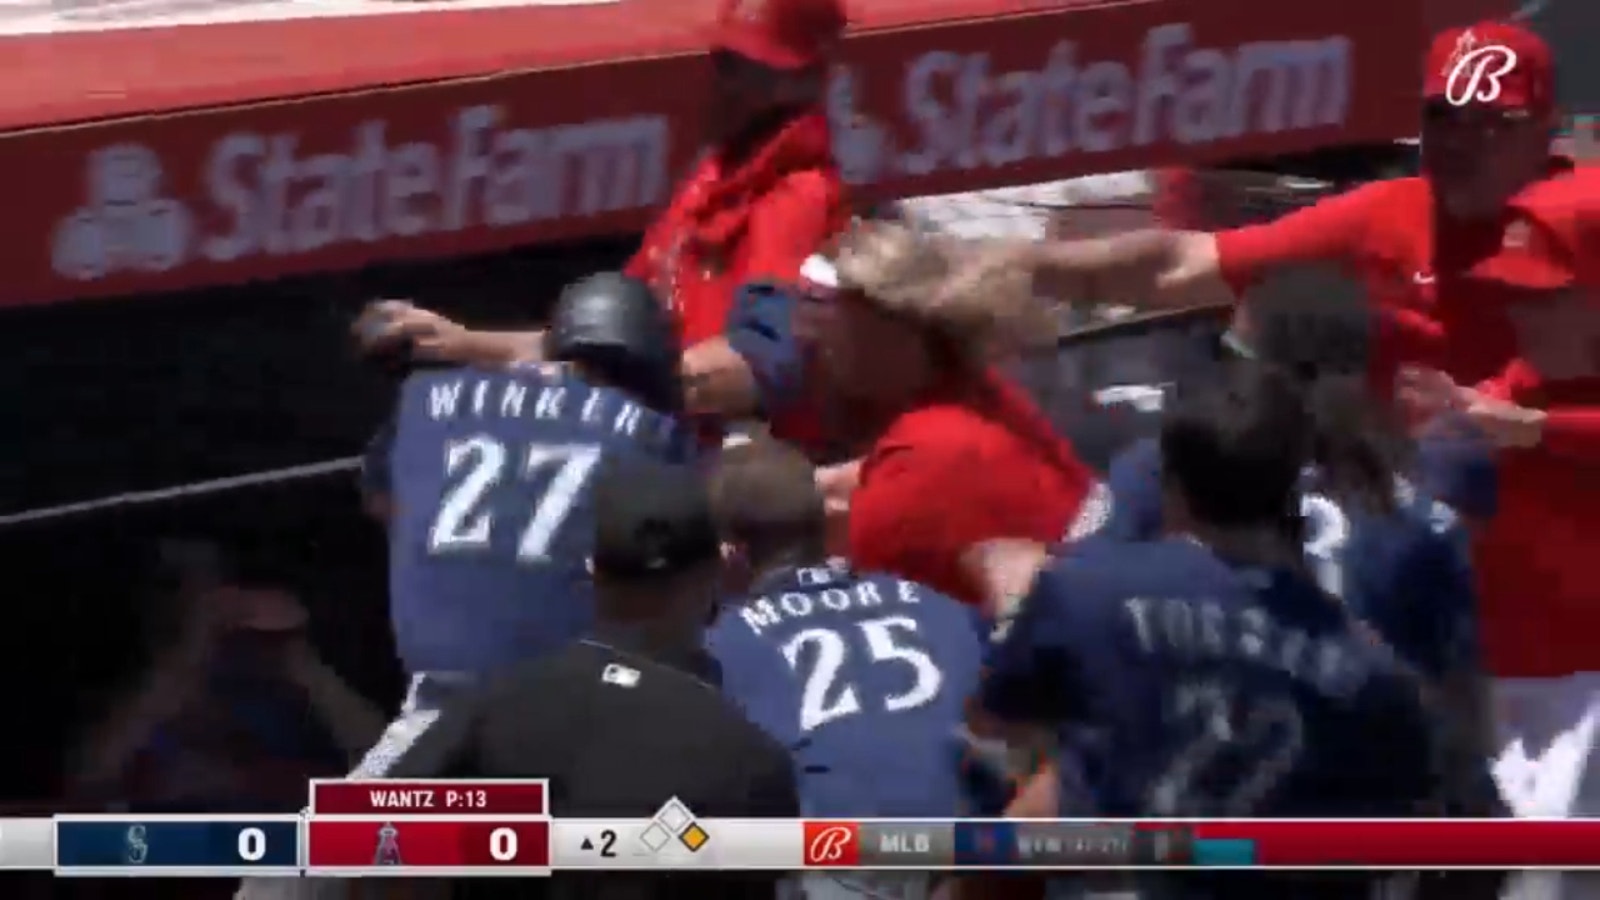 Mariners and Angels get into massive brawl after Andrew Wantz drilled Jesse Winker with a pitch